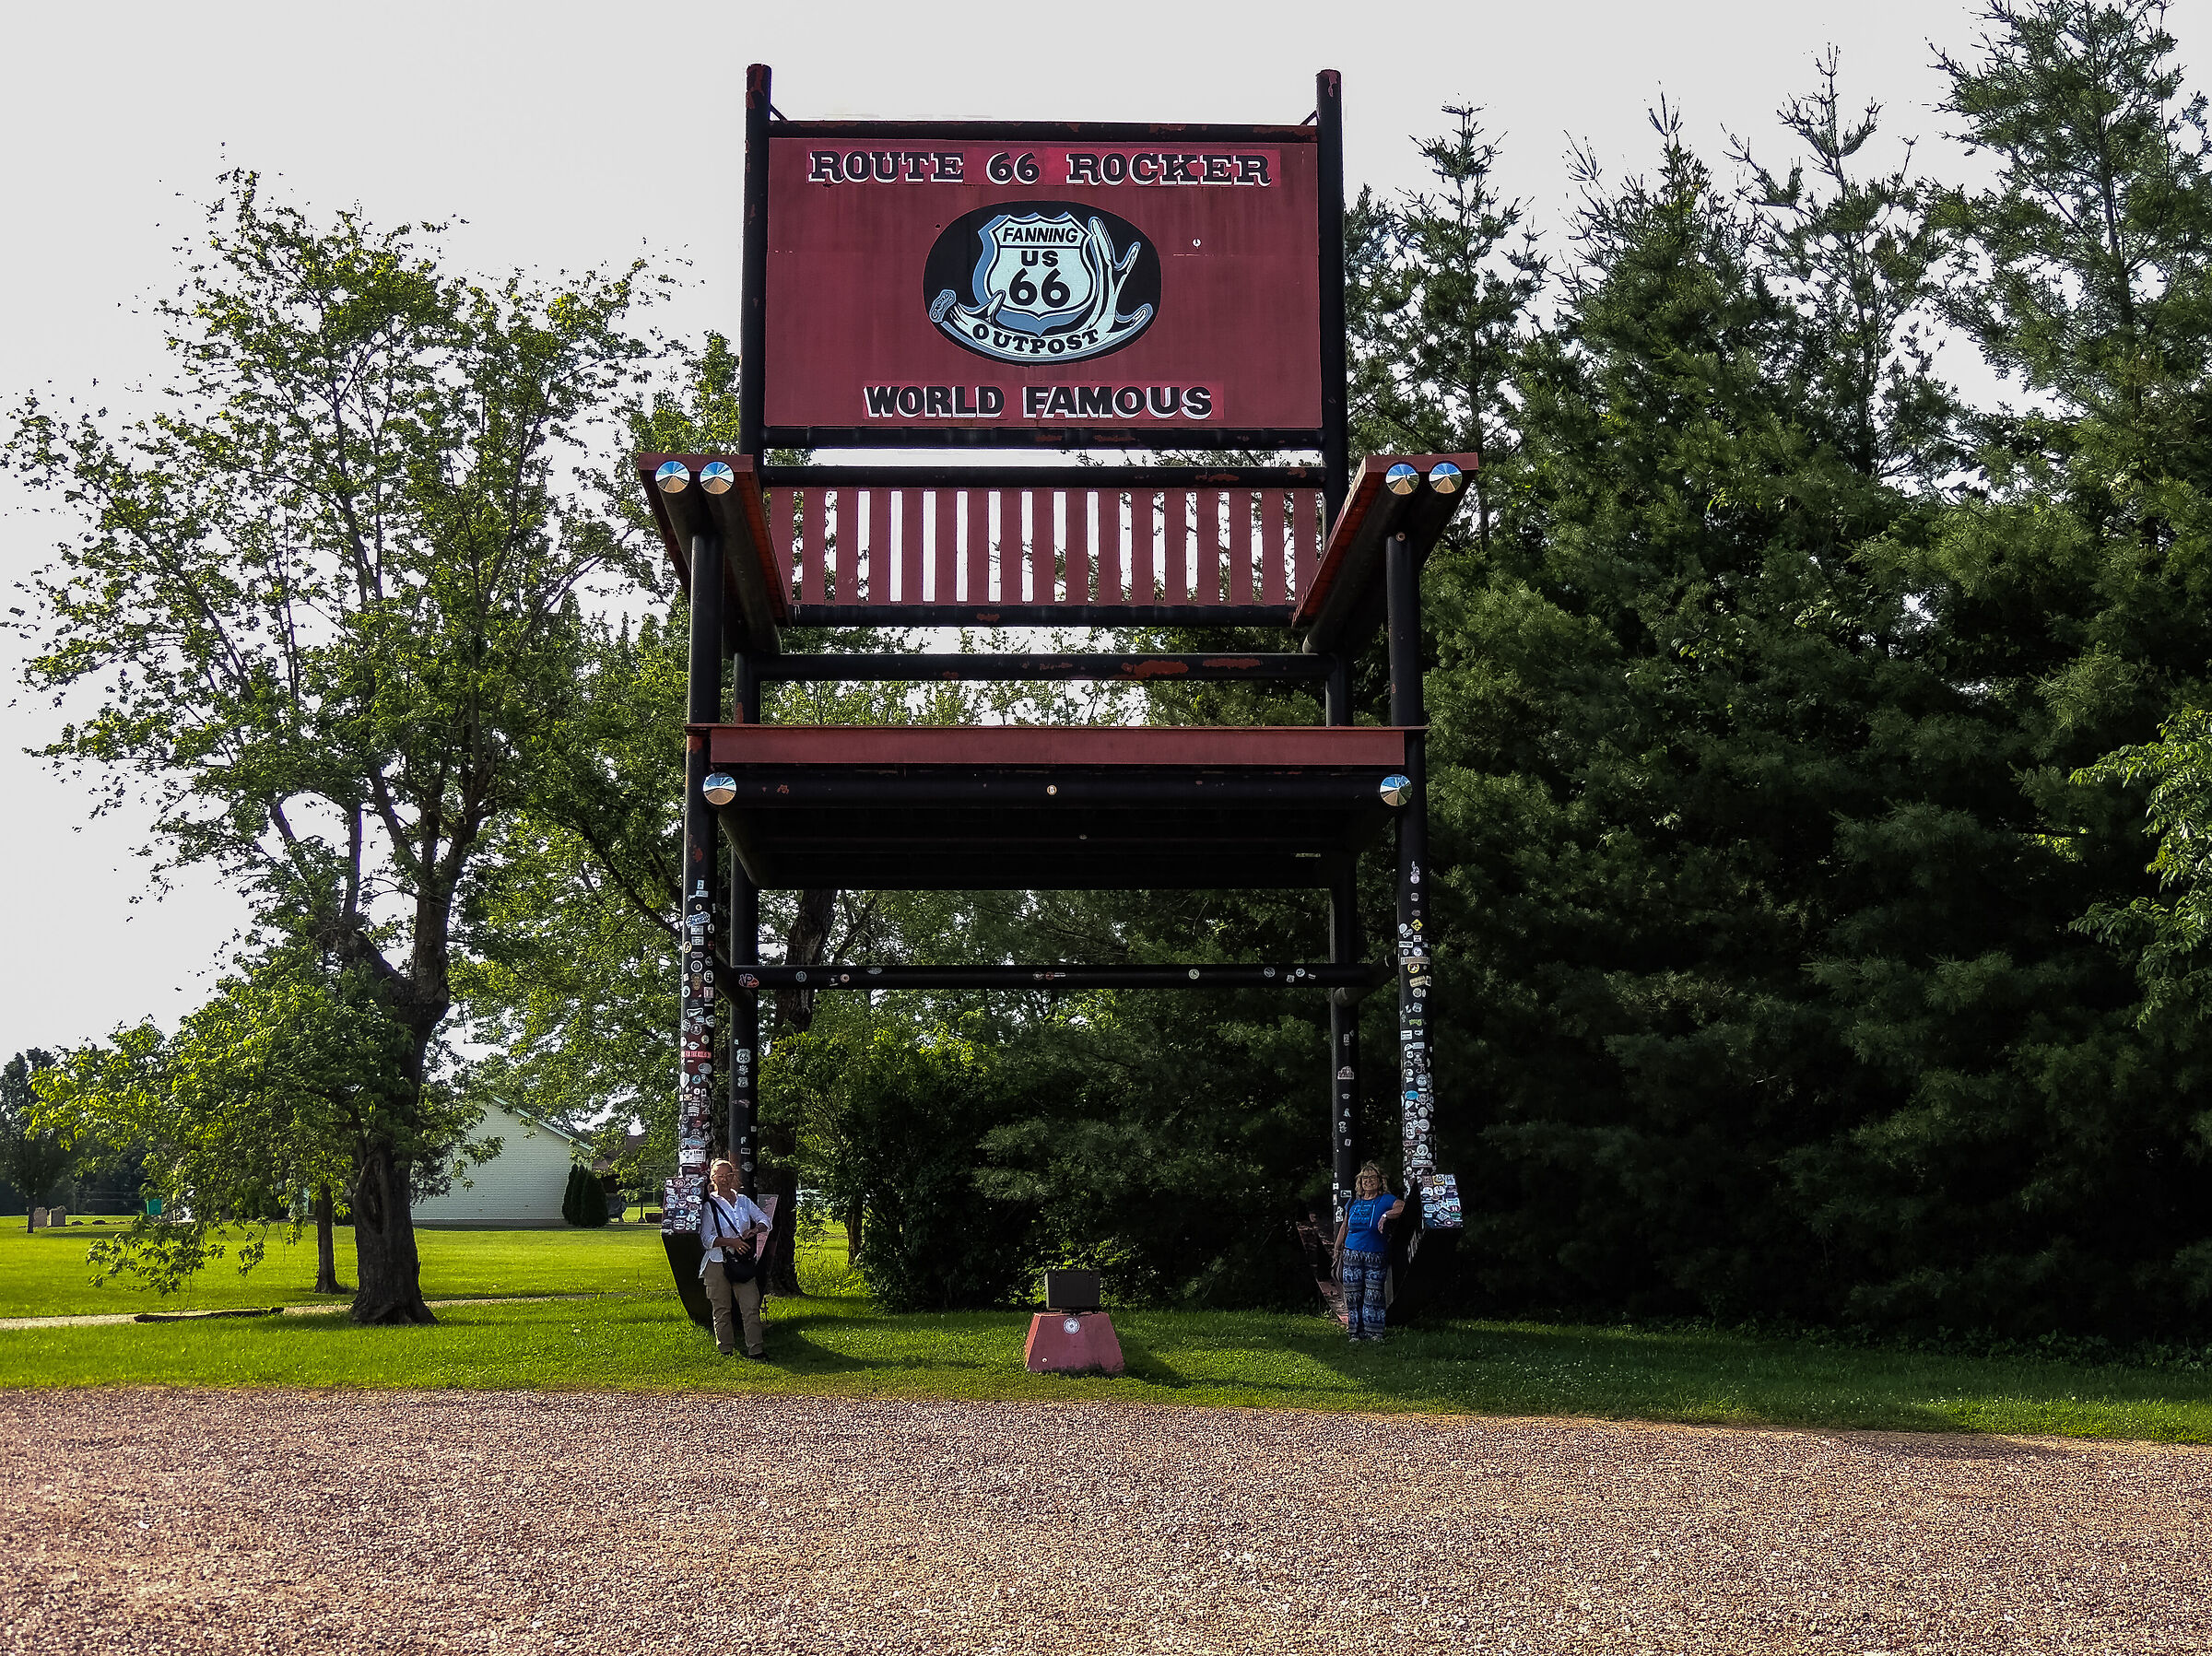 The world's largest rocking chair...